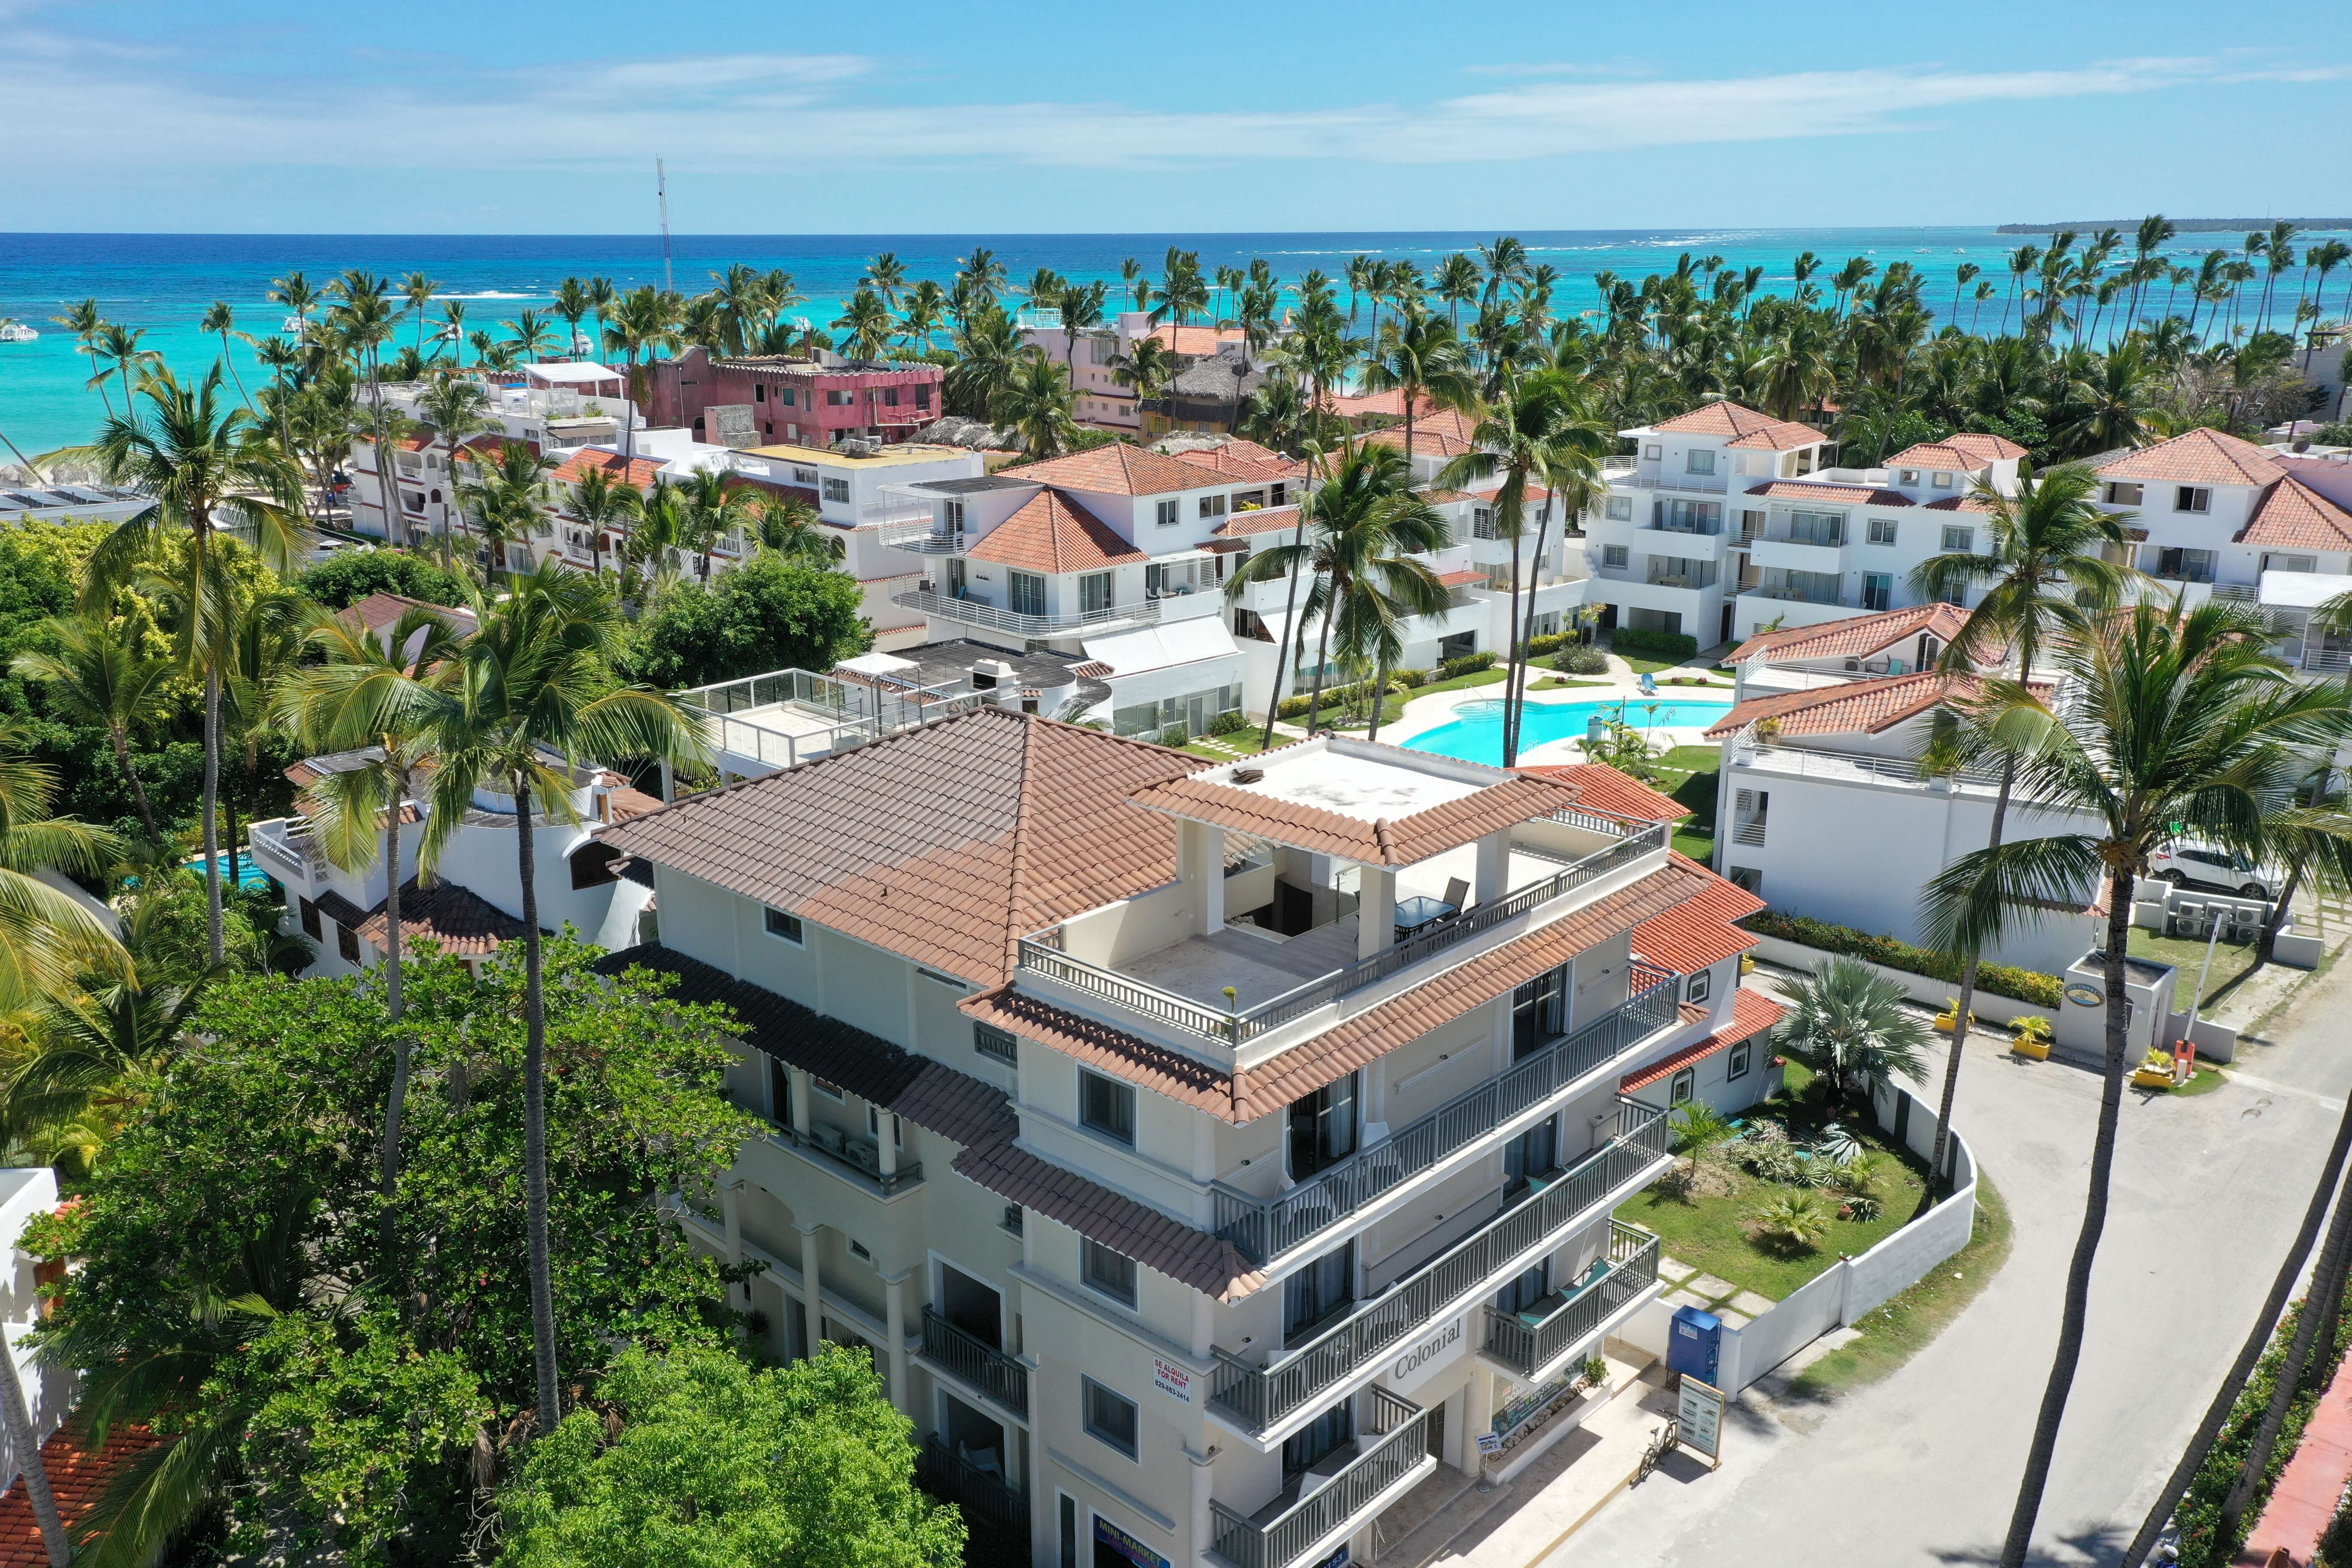 Aparthotel On The Beach For Sale, With Excellent Rent Income, Six Condos, Two Commercial Premises,Excellent Opportunity For Investment. Los Corales. Bavaro. Dominican Republic.